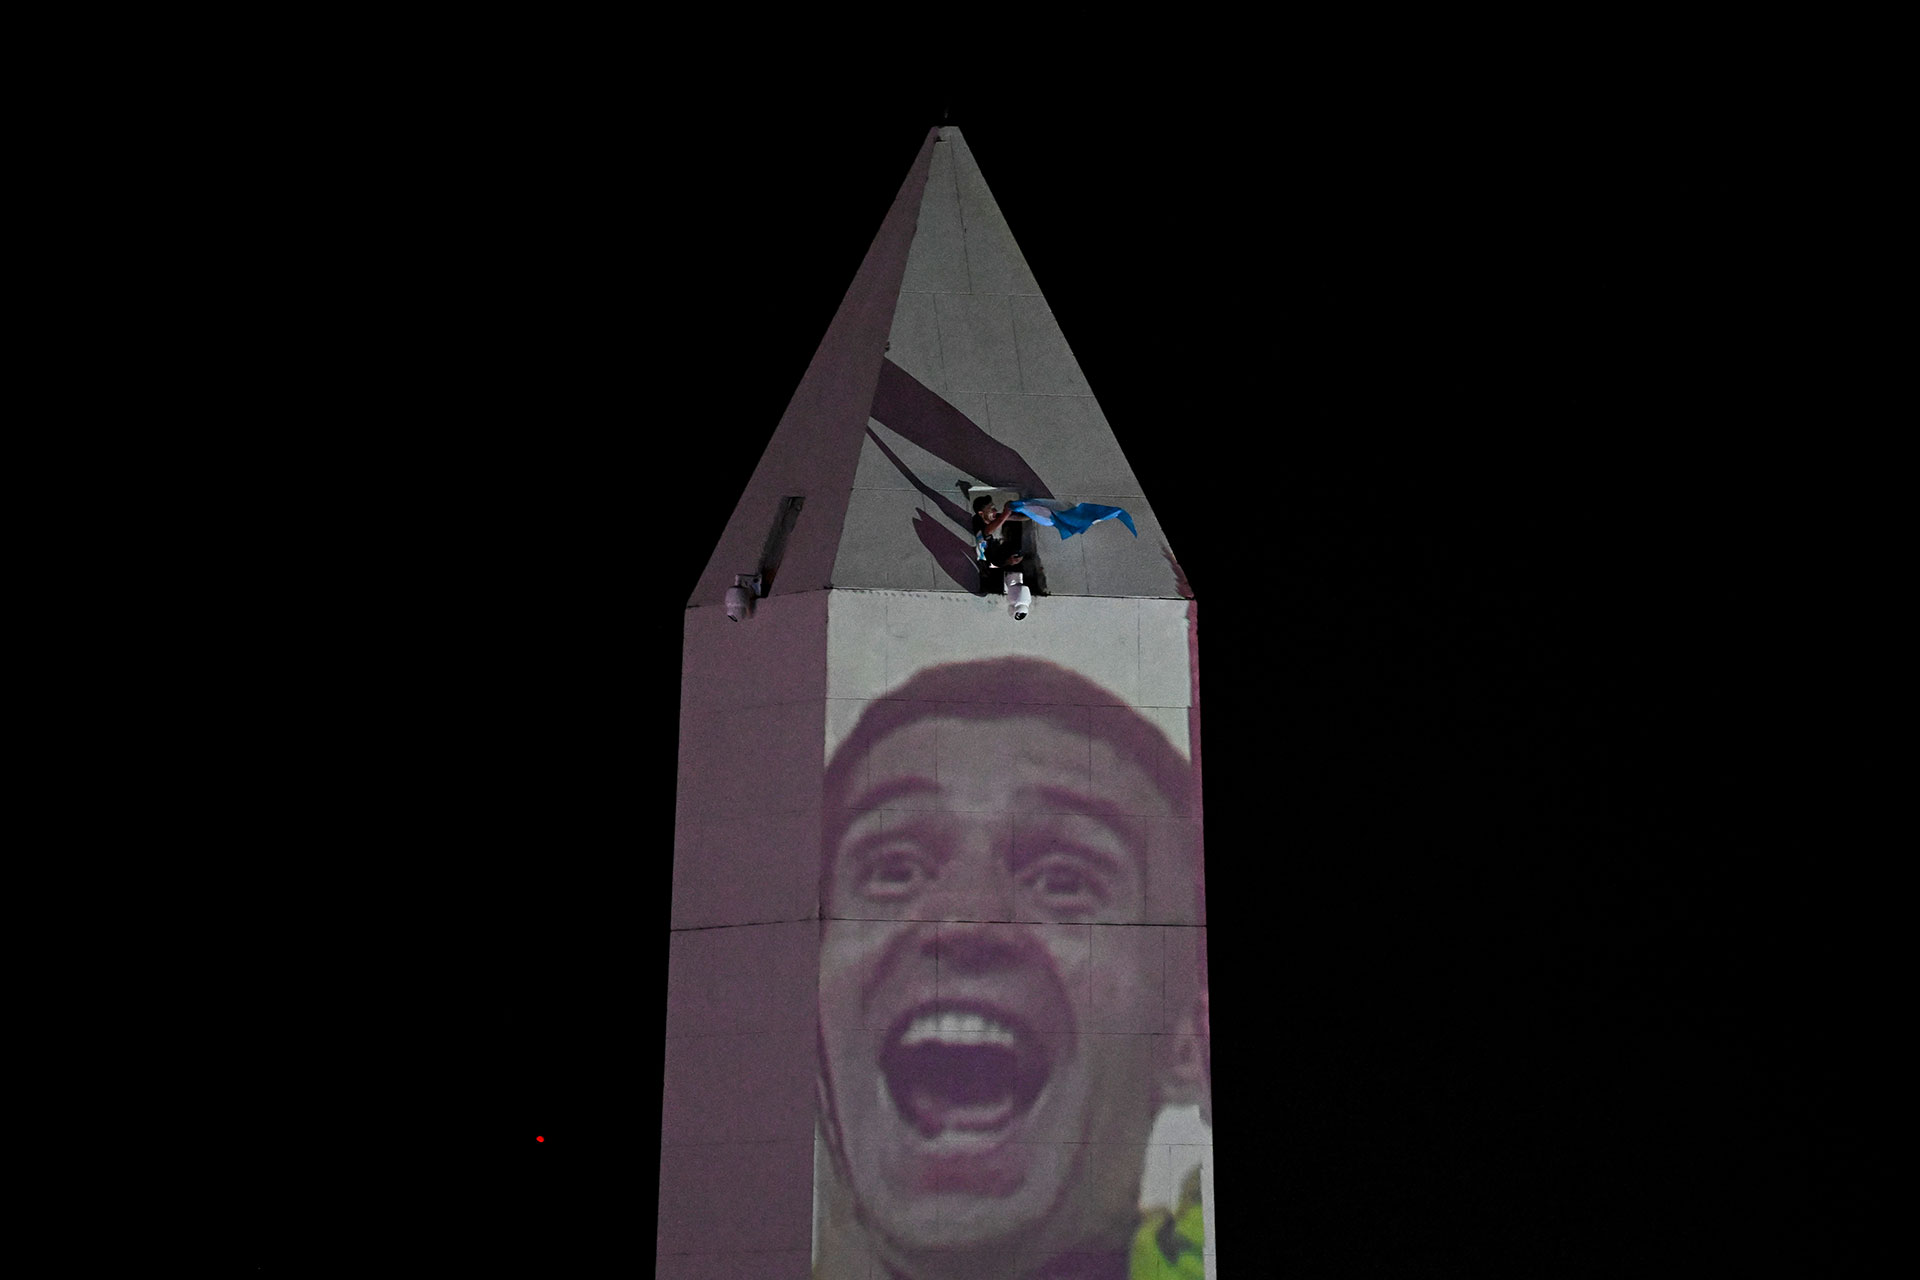 A fan of Argentina celebrates on top of the Obelisk after winning the Qatar 2022 World Cup against France in Buenos Aires on December 18, 2022. (Photo by Luis ROBAYO / AFP)